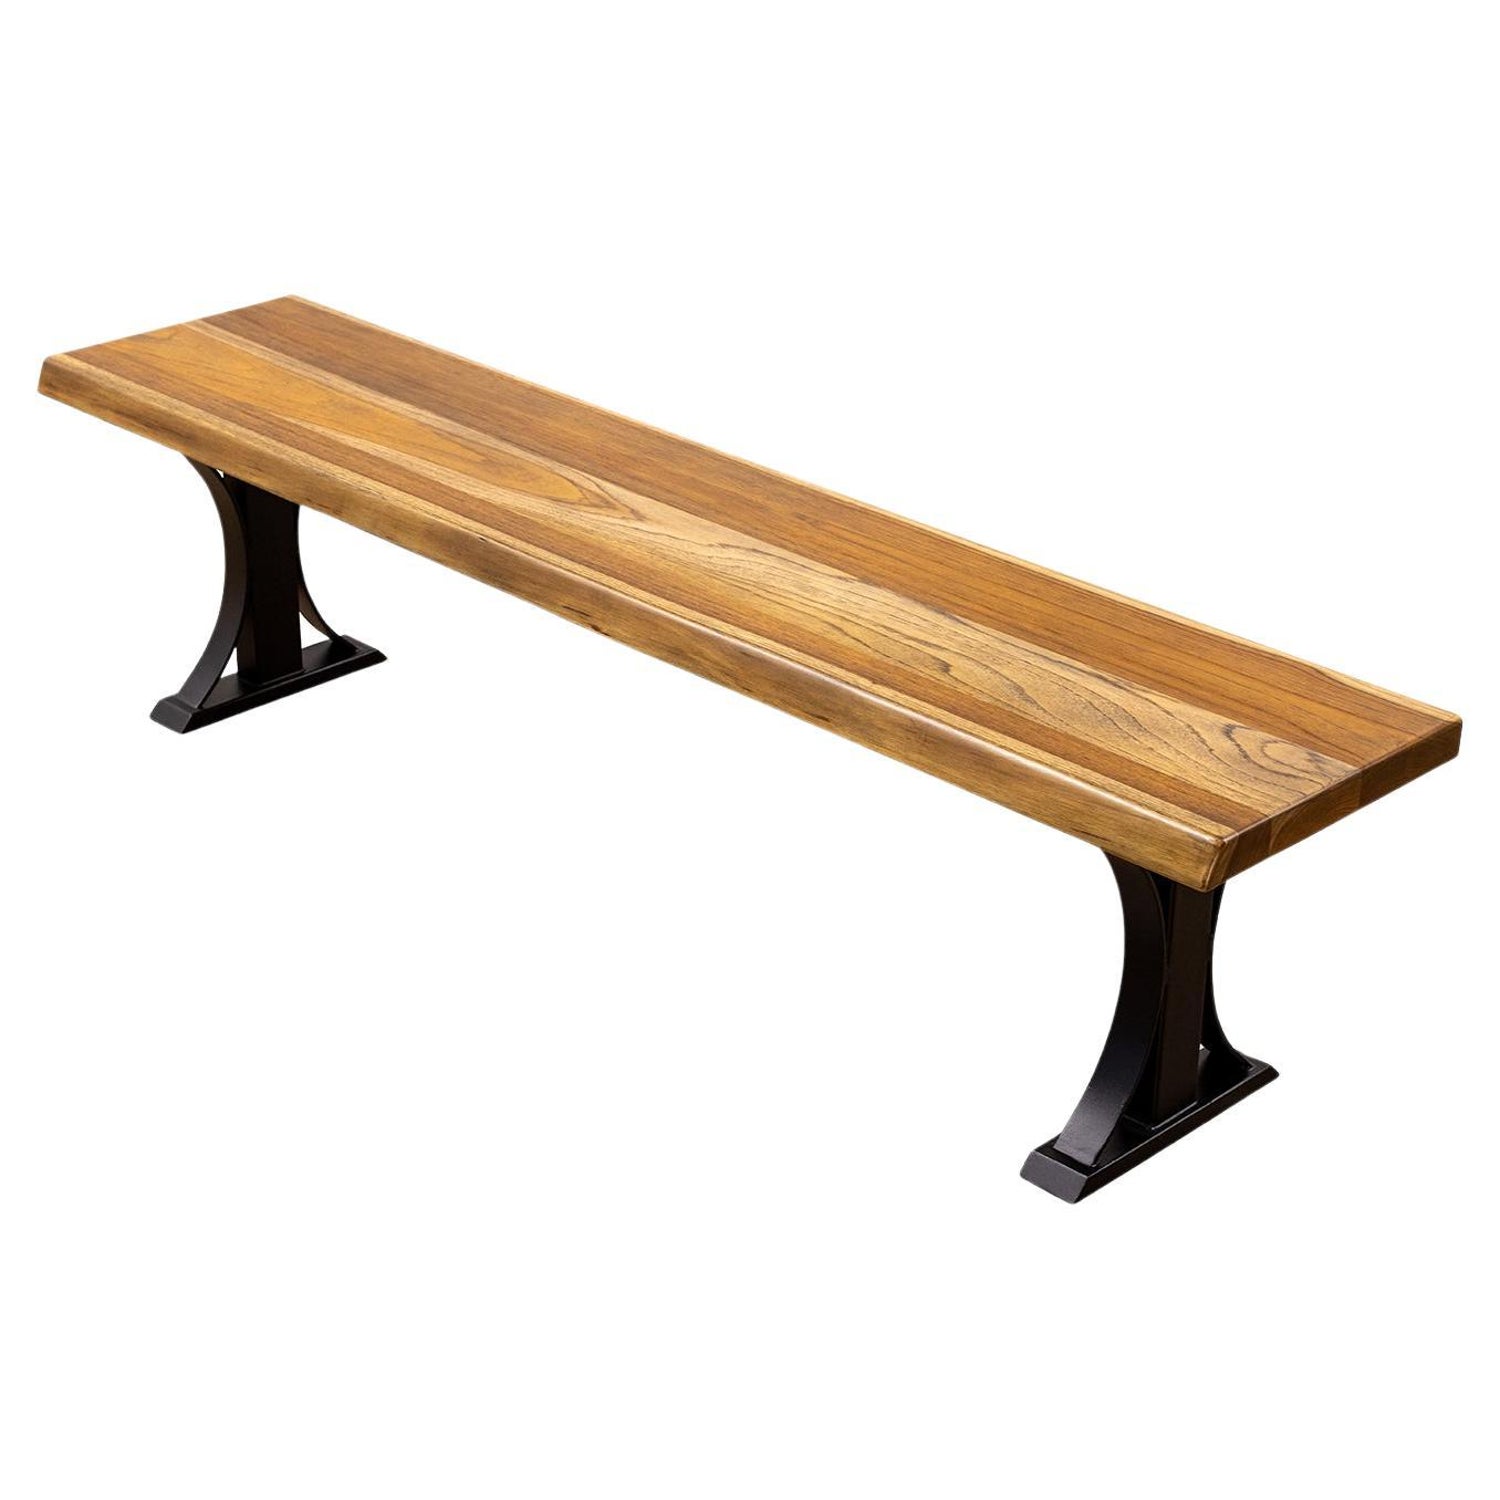 Approx. 70 Inches Long bench with Natural Teakwood Branch Legs 70x12x18H -  Lilys Living